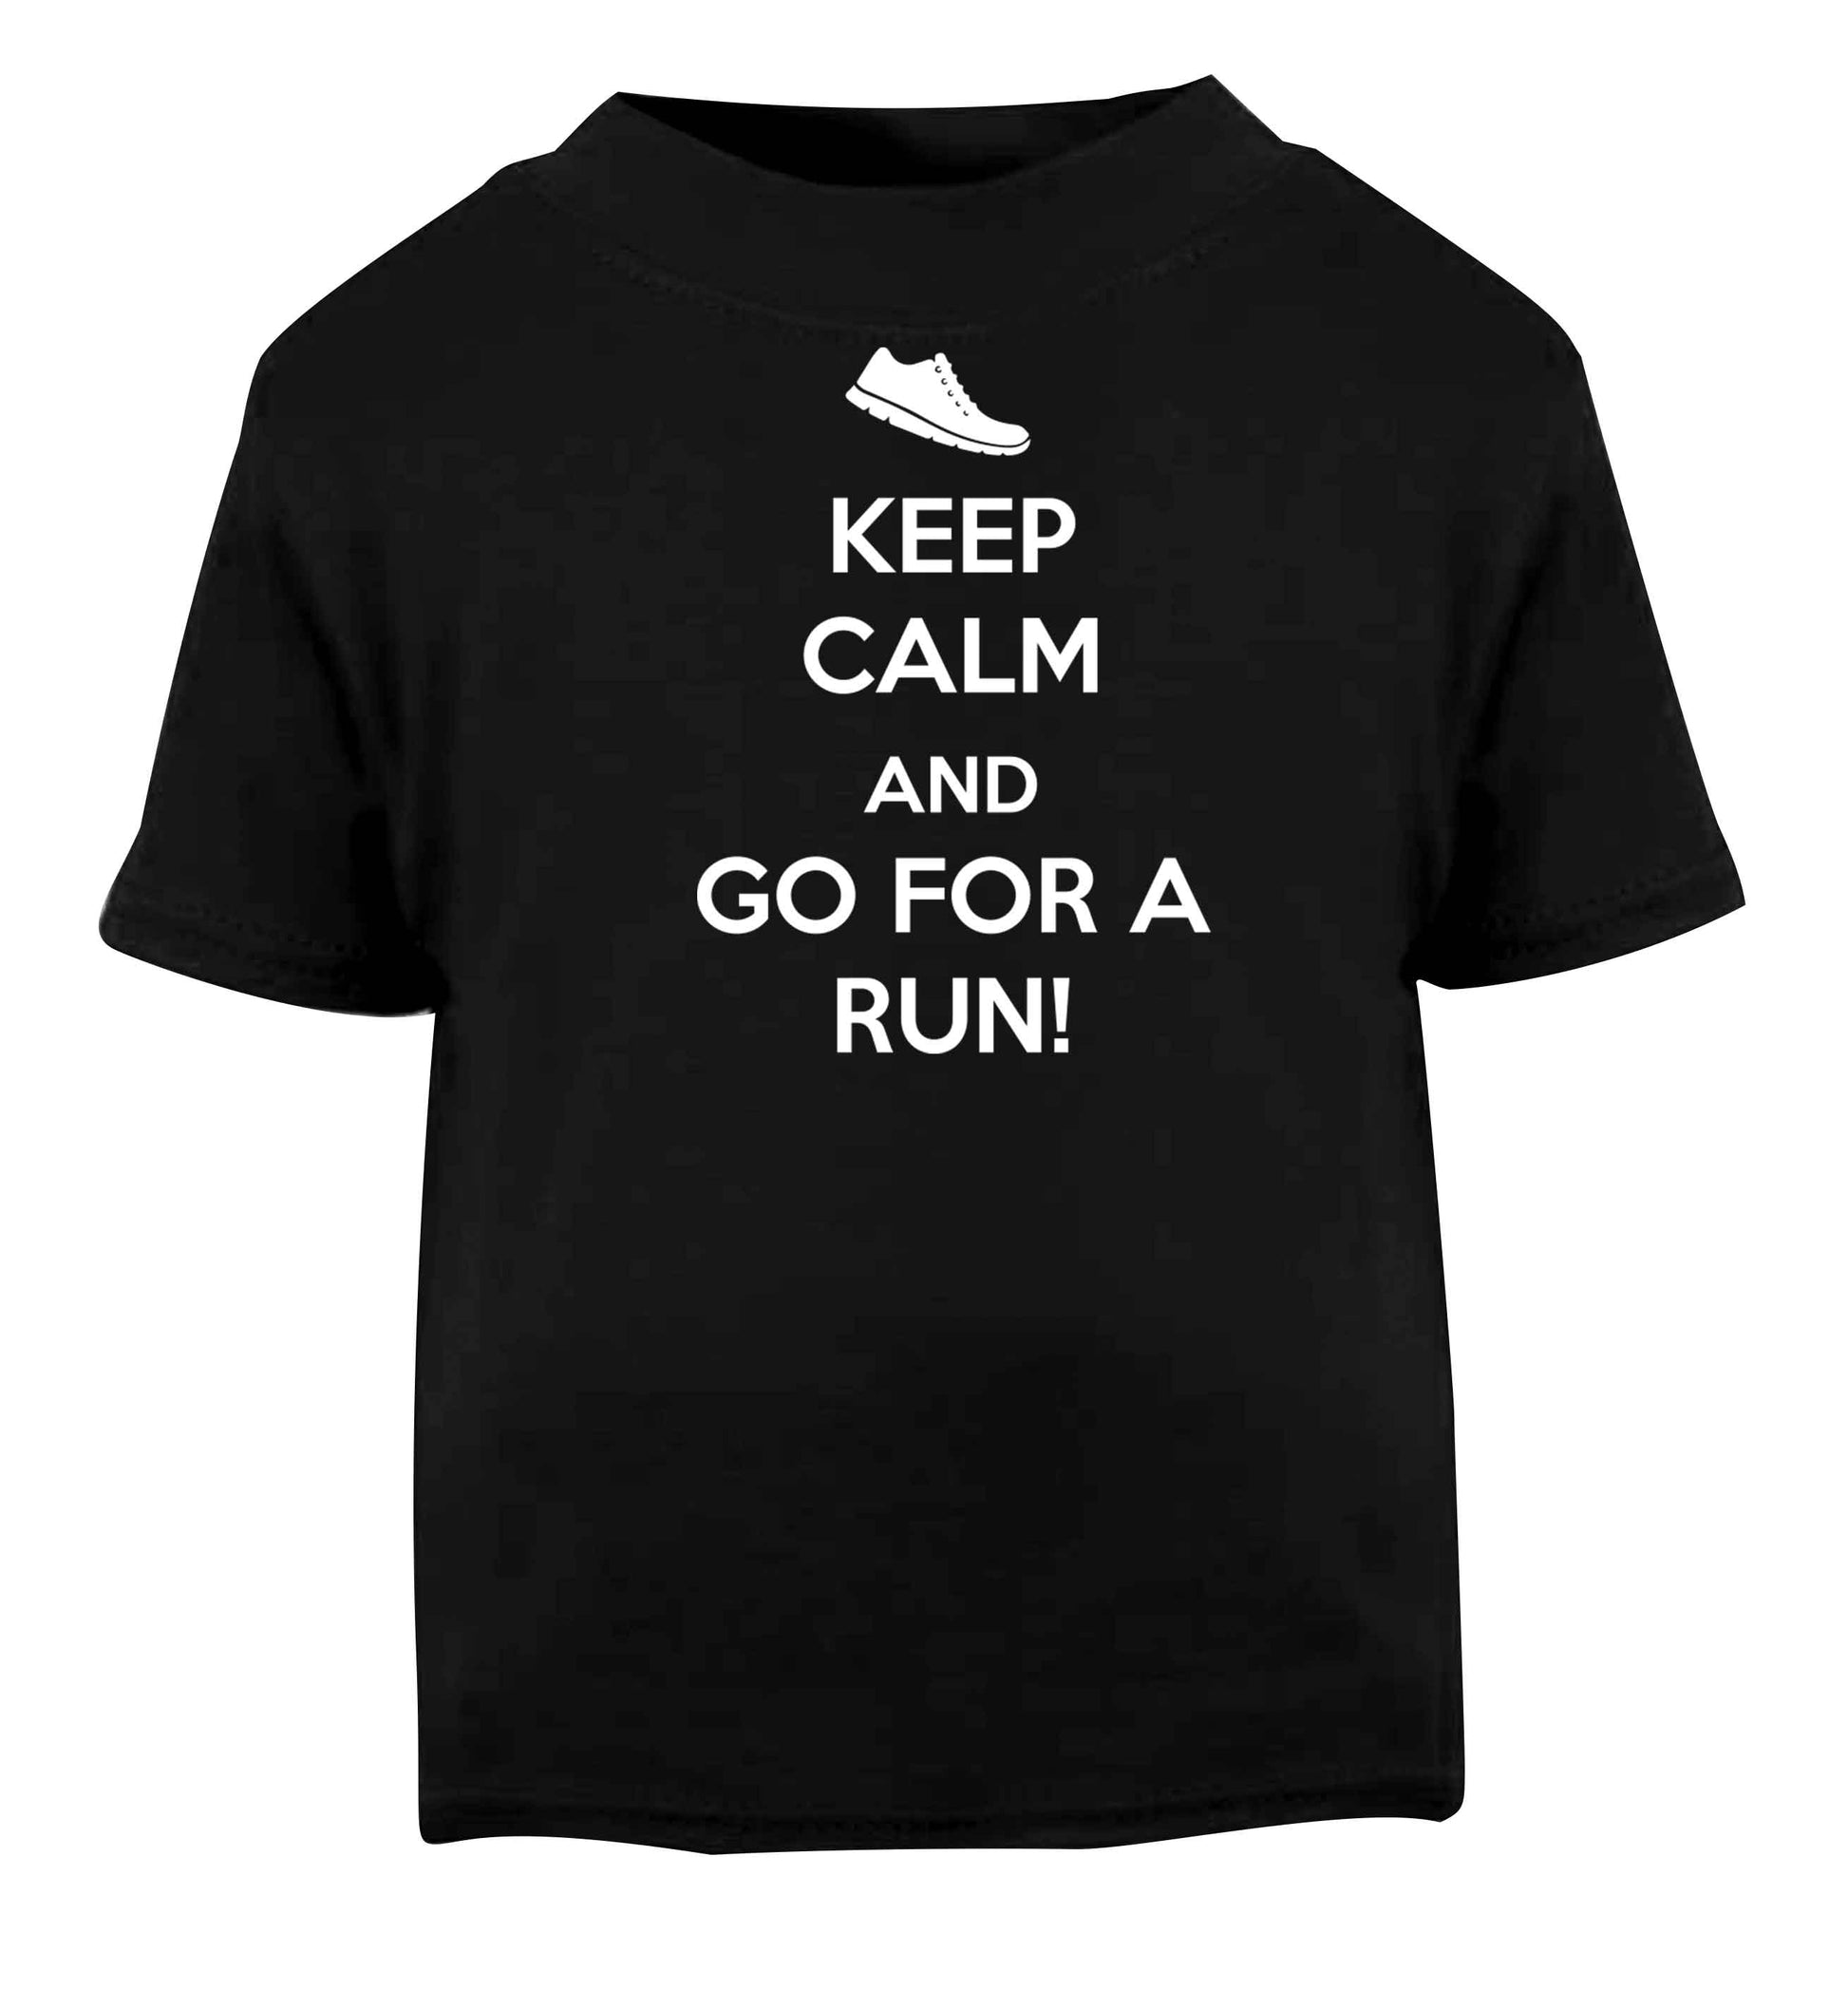 Keep calm and go for a run Black baby toddler Tshirt 2 years